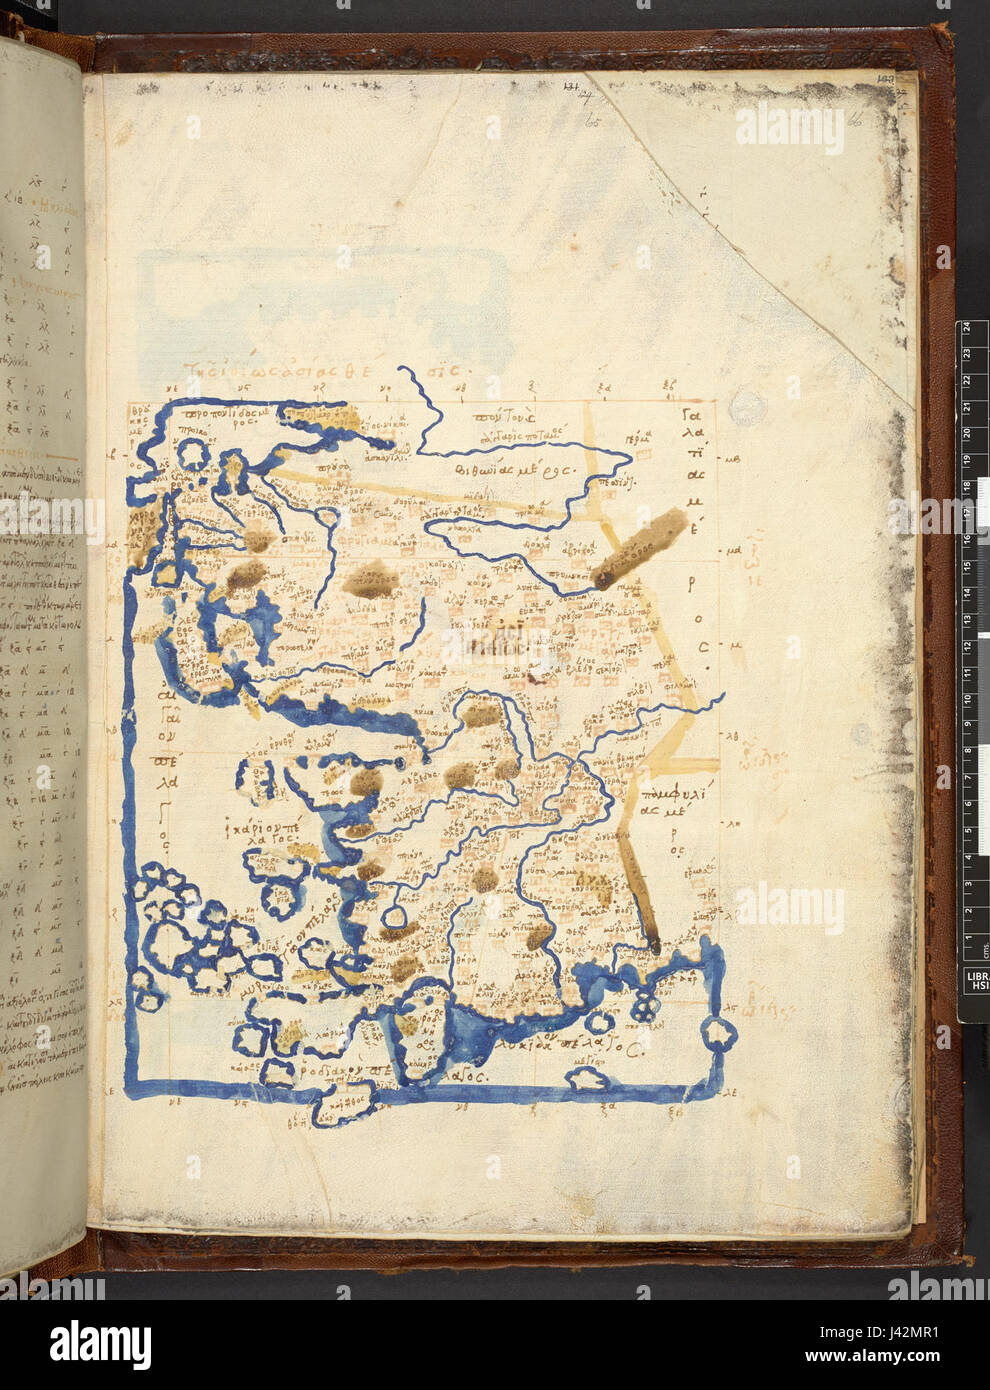 Map after Ptolemy's Geographia (Burney MS 111, f.65r) Stock Photo